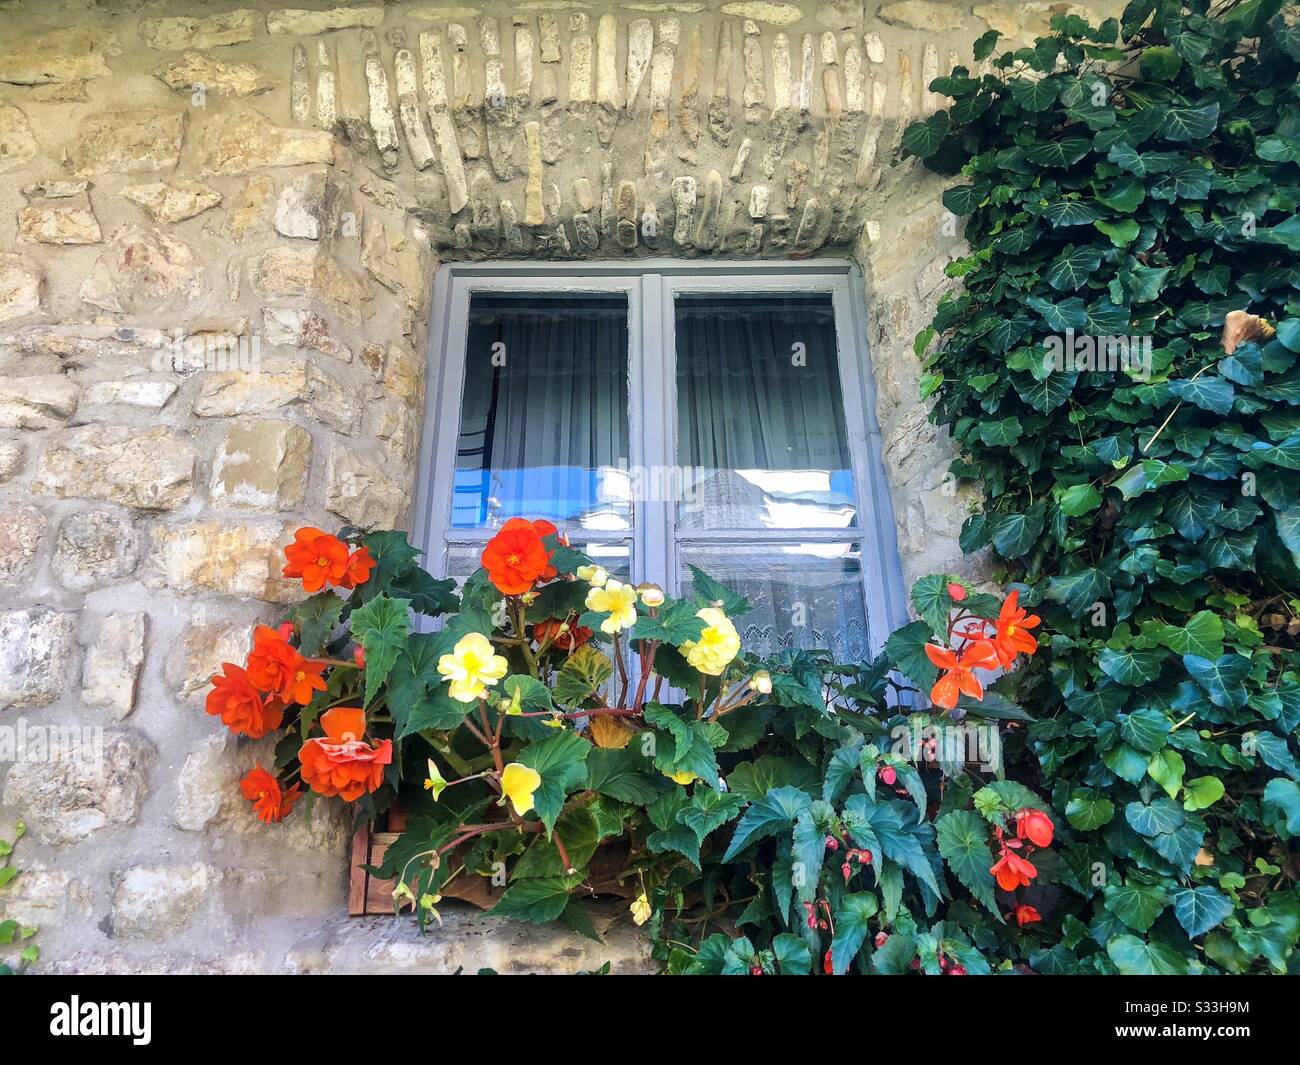 Window with hanging ivy and flowers Stock Photo